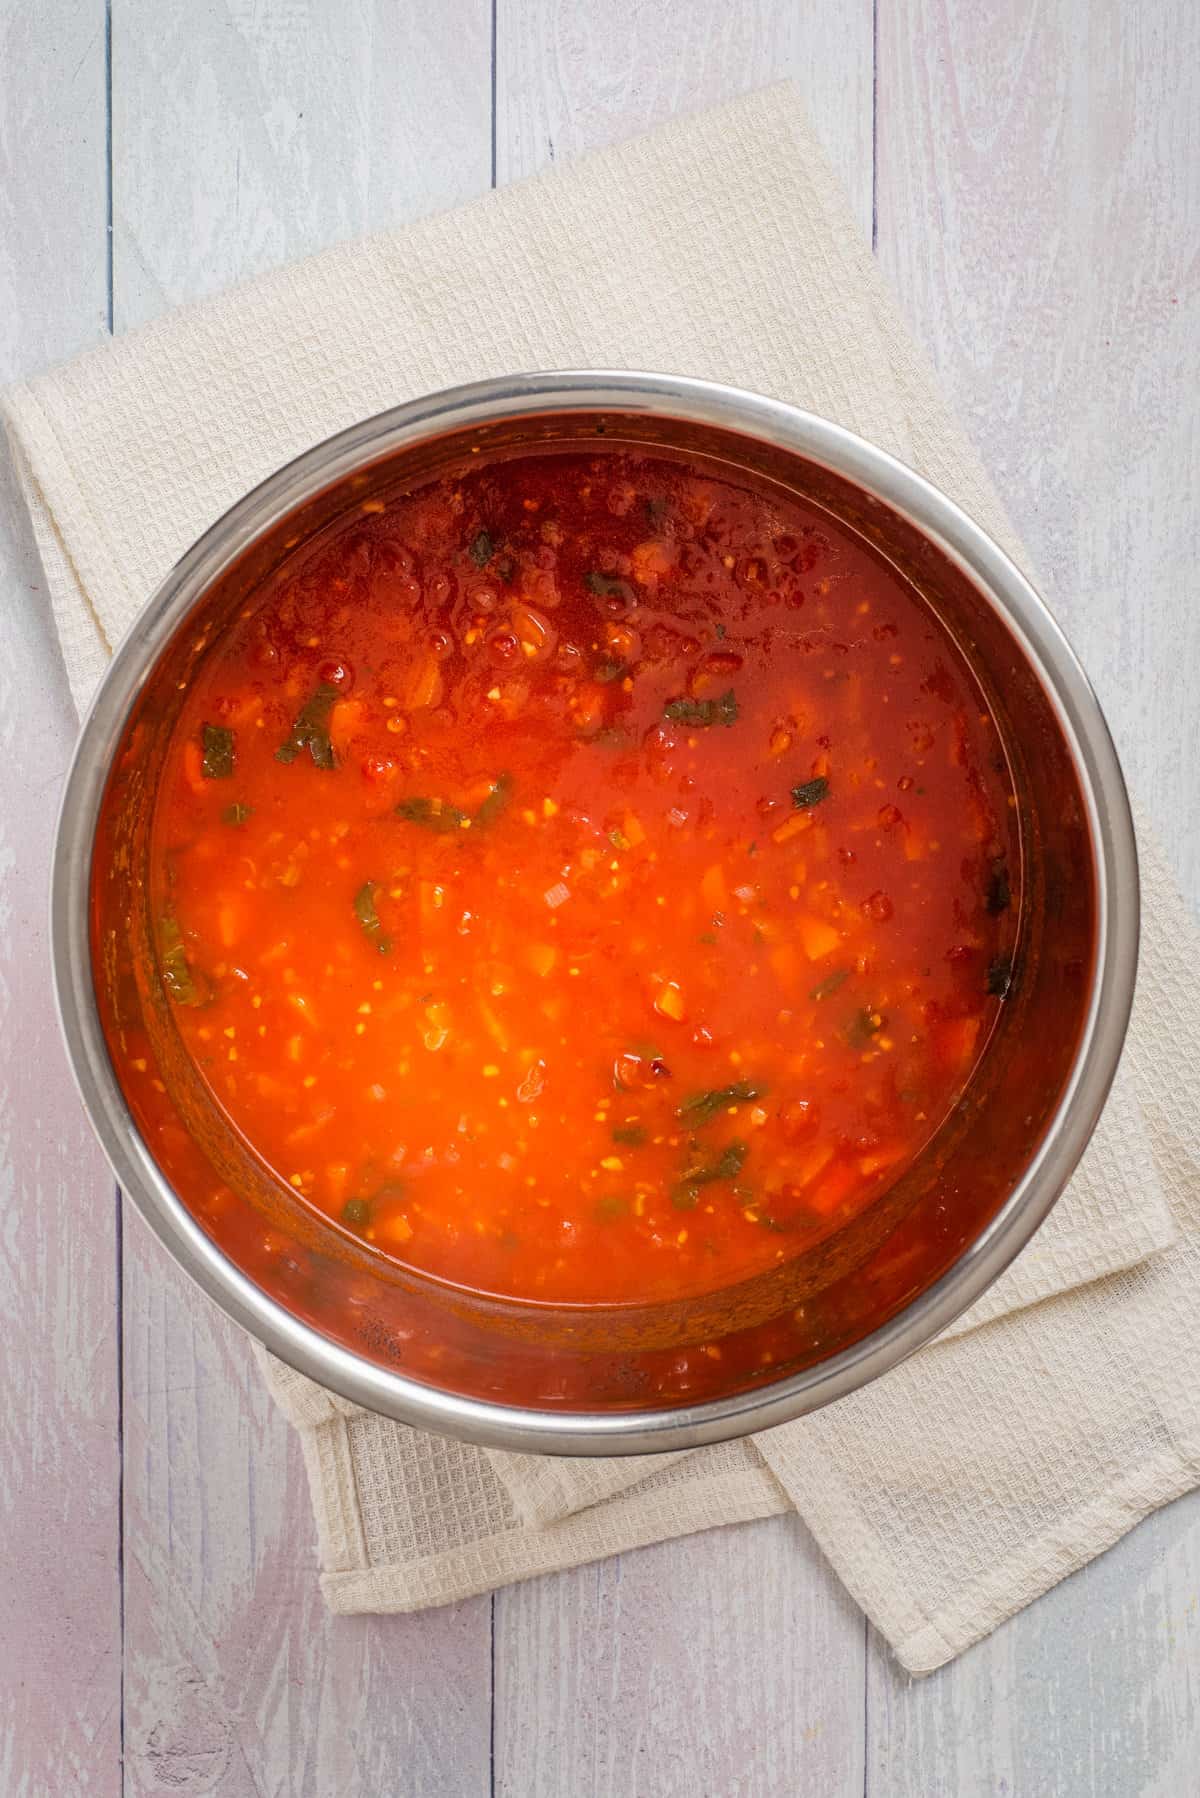 Overhead view of cooked Instant Pot tomato soup.